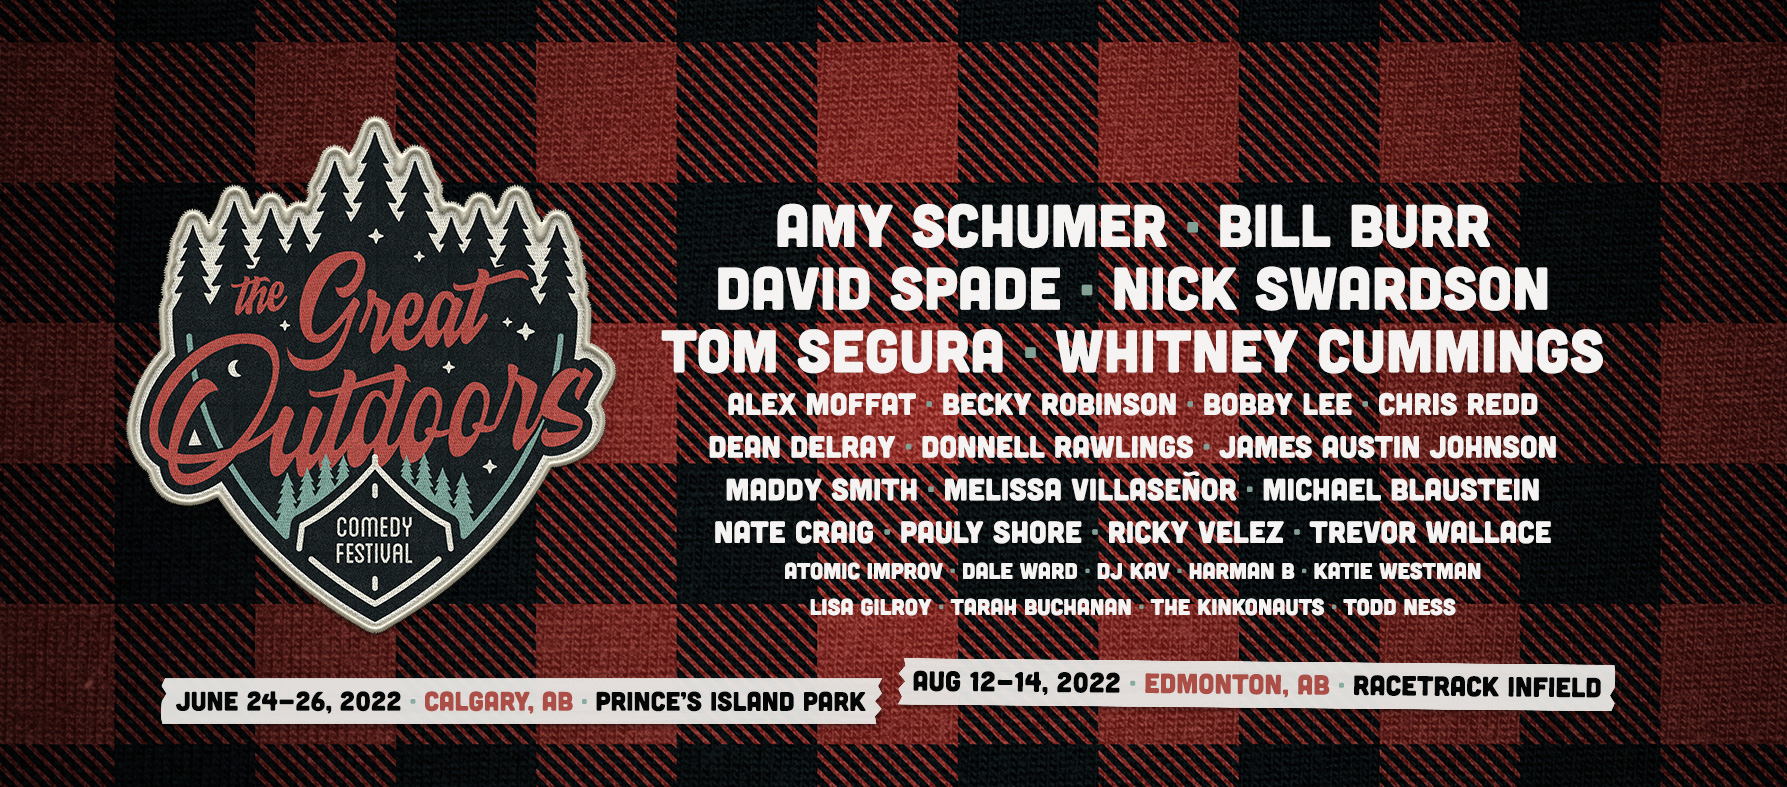 The Great Outdoors Comedy Festival ft. Amy Schumer, Bill Burr, David Spade, Nick Swardson, Tom Segura, Whitney Cummings and more in Calgary and Edmonton Alberta